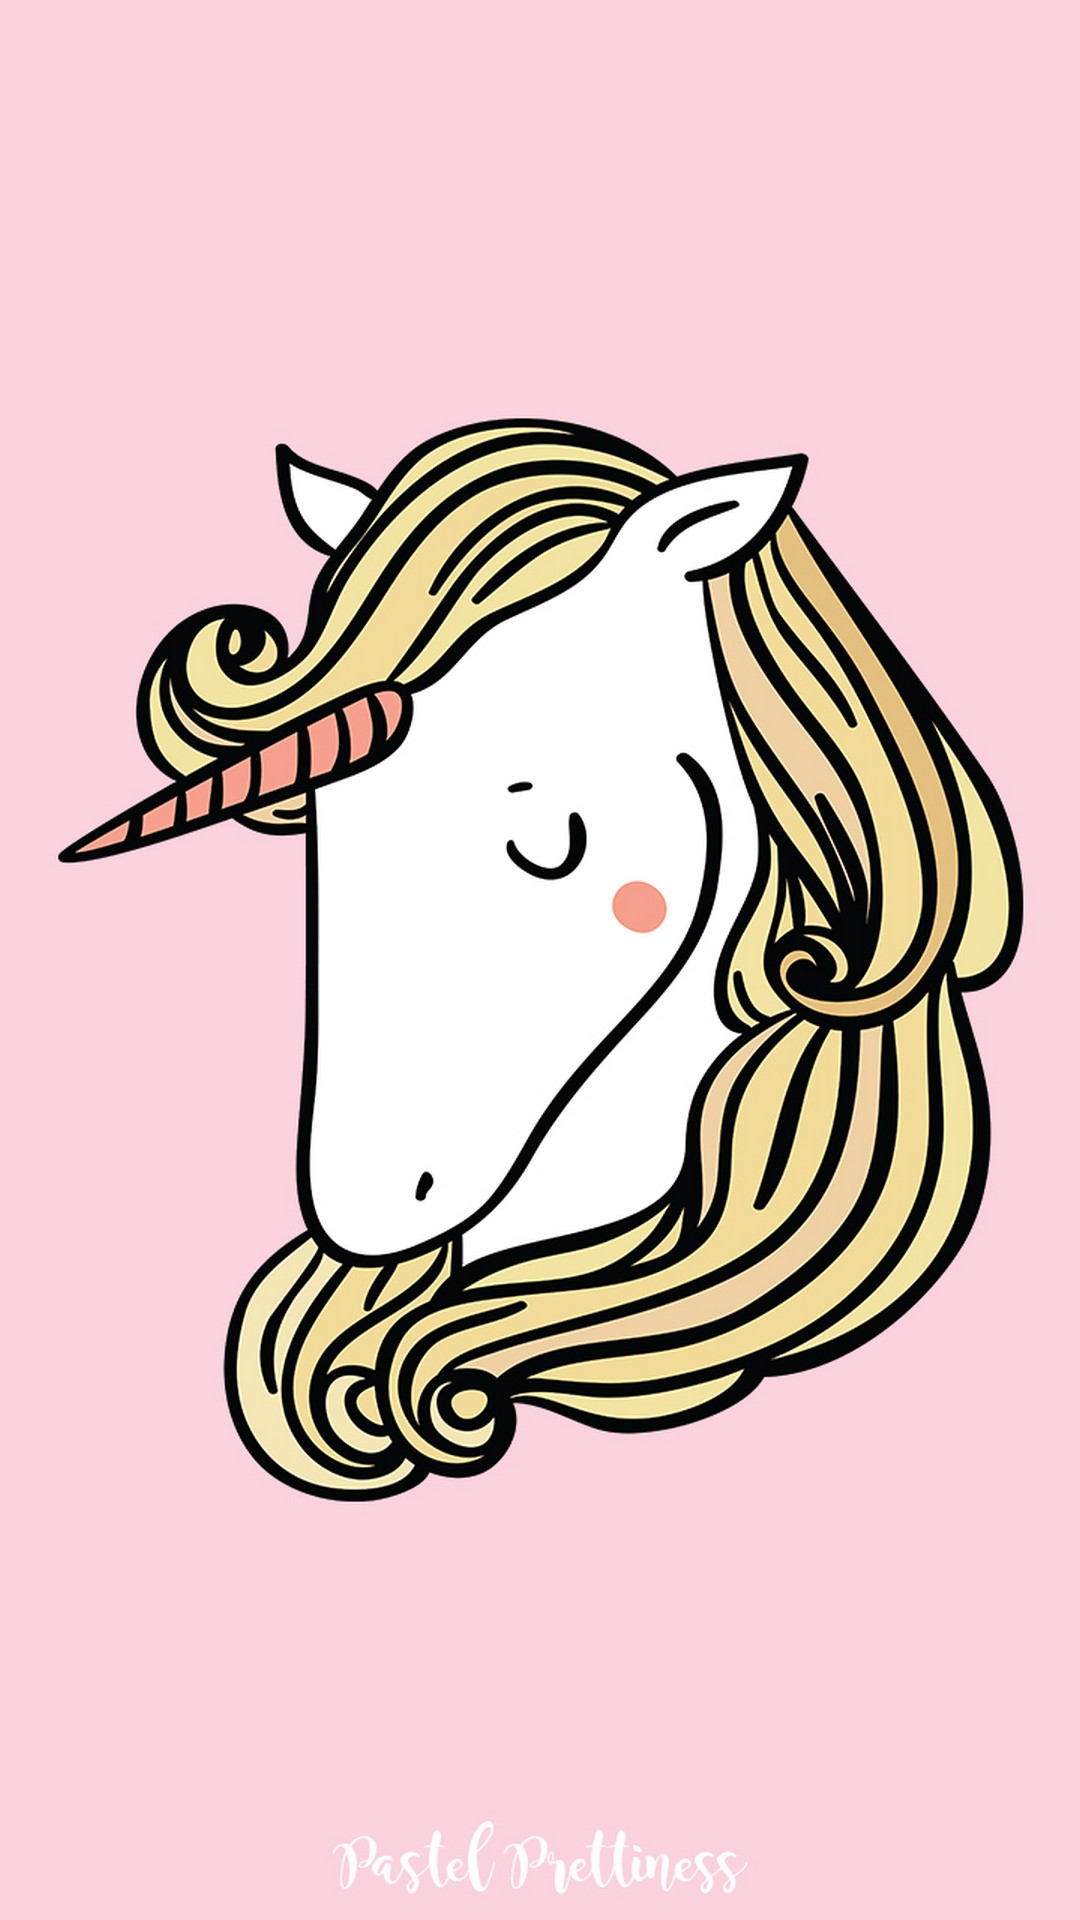 Cute Unicorn iPhone Backgrounds with high-resolution 1080x1920 pixel. You can set as wallpaper for Apple iPhone X, XS Max, XR, 8, 7, 6, SE, iPad. Enjoy and share your favorite HD wallpapers and background images